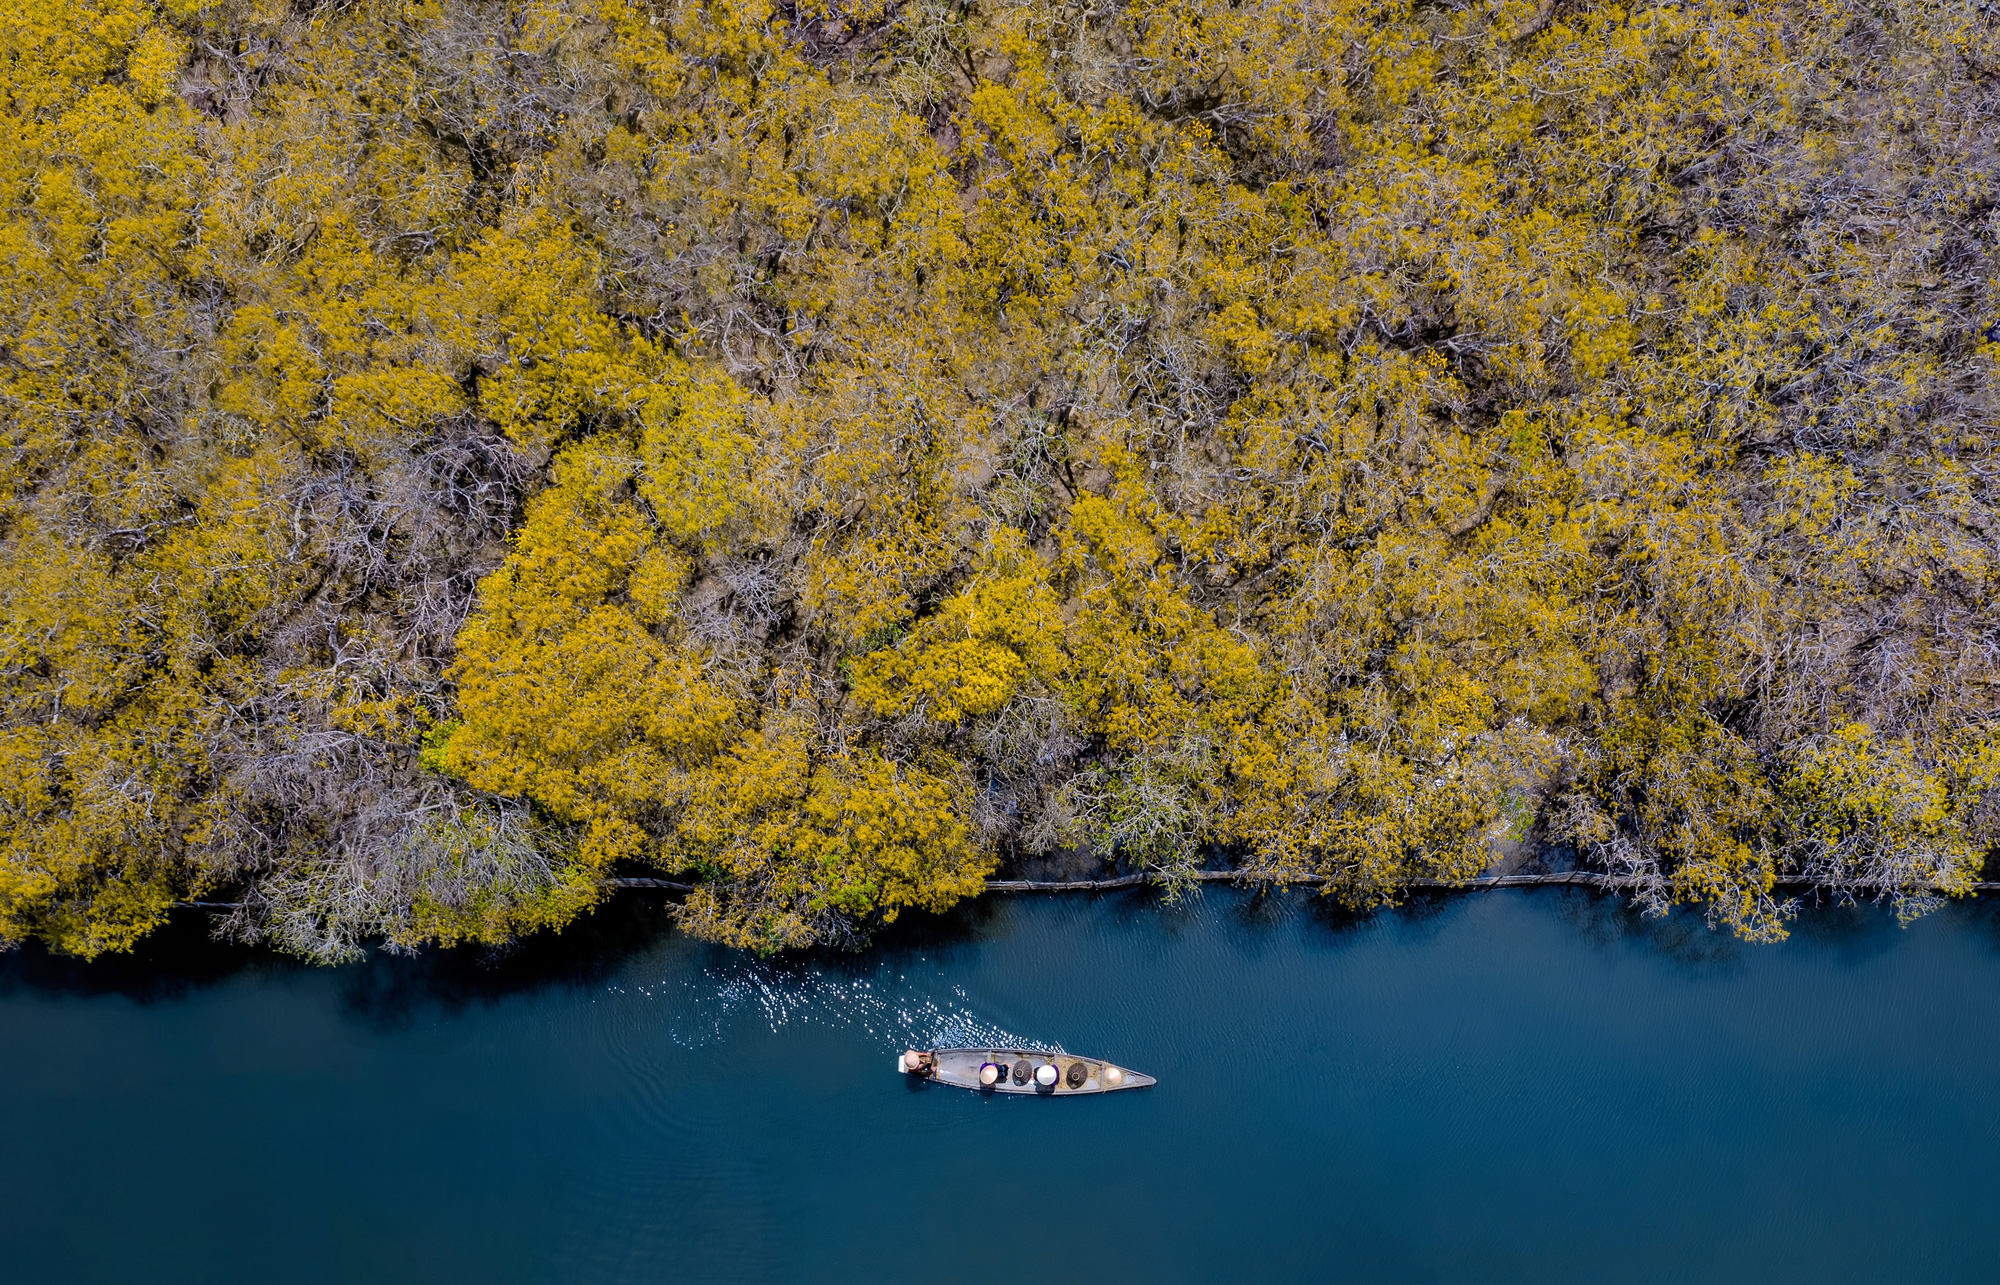 An aerial photo captures a part of Ru Cha mangrove forest ecosystem in Huong Tra District, Thua Thien-Hue Province, Vietnam. Photo: Kelvin Long / Tuoi Tre